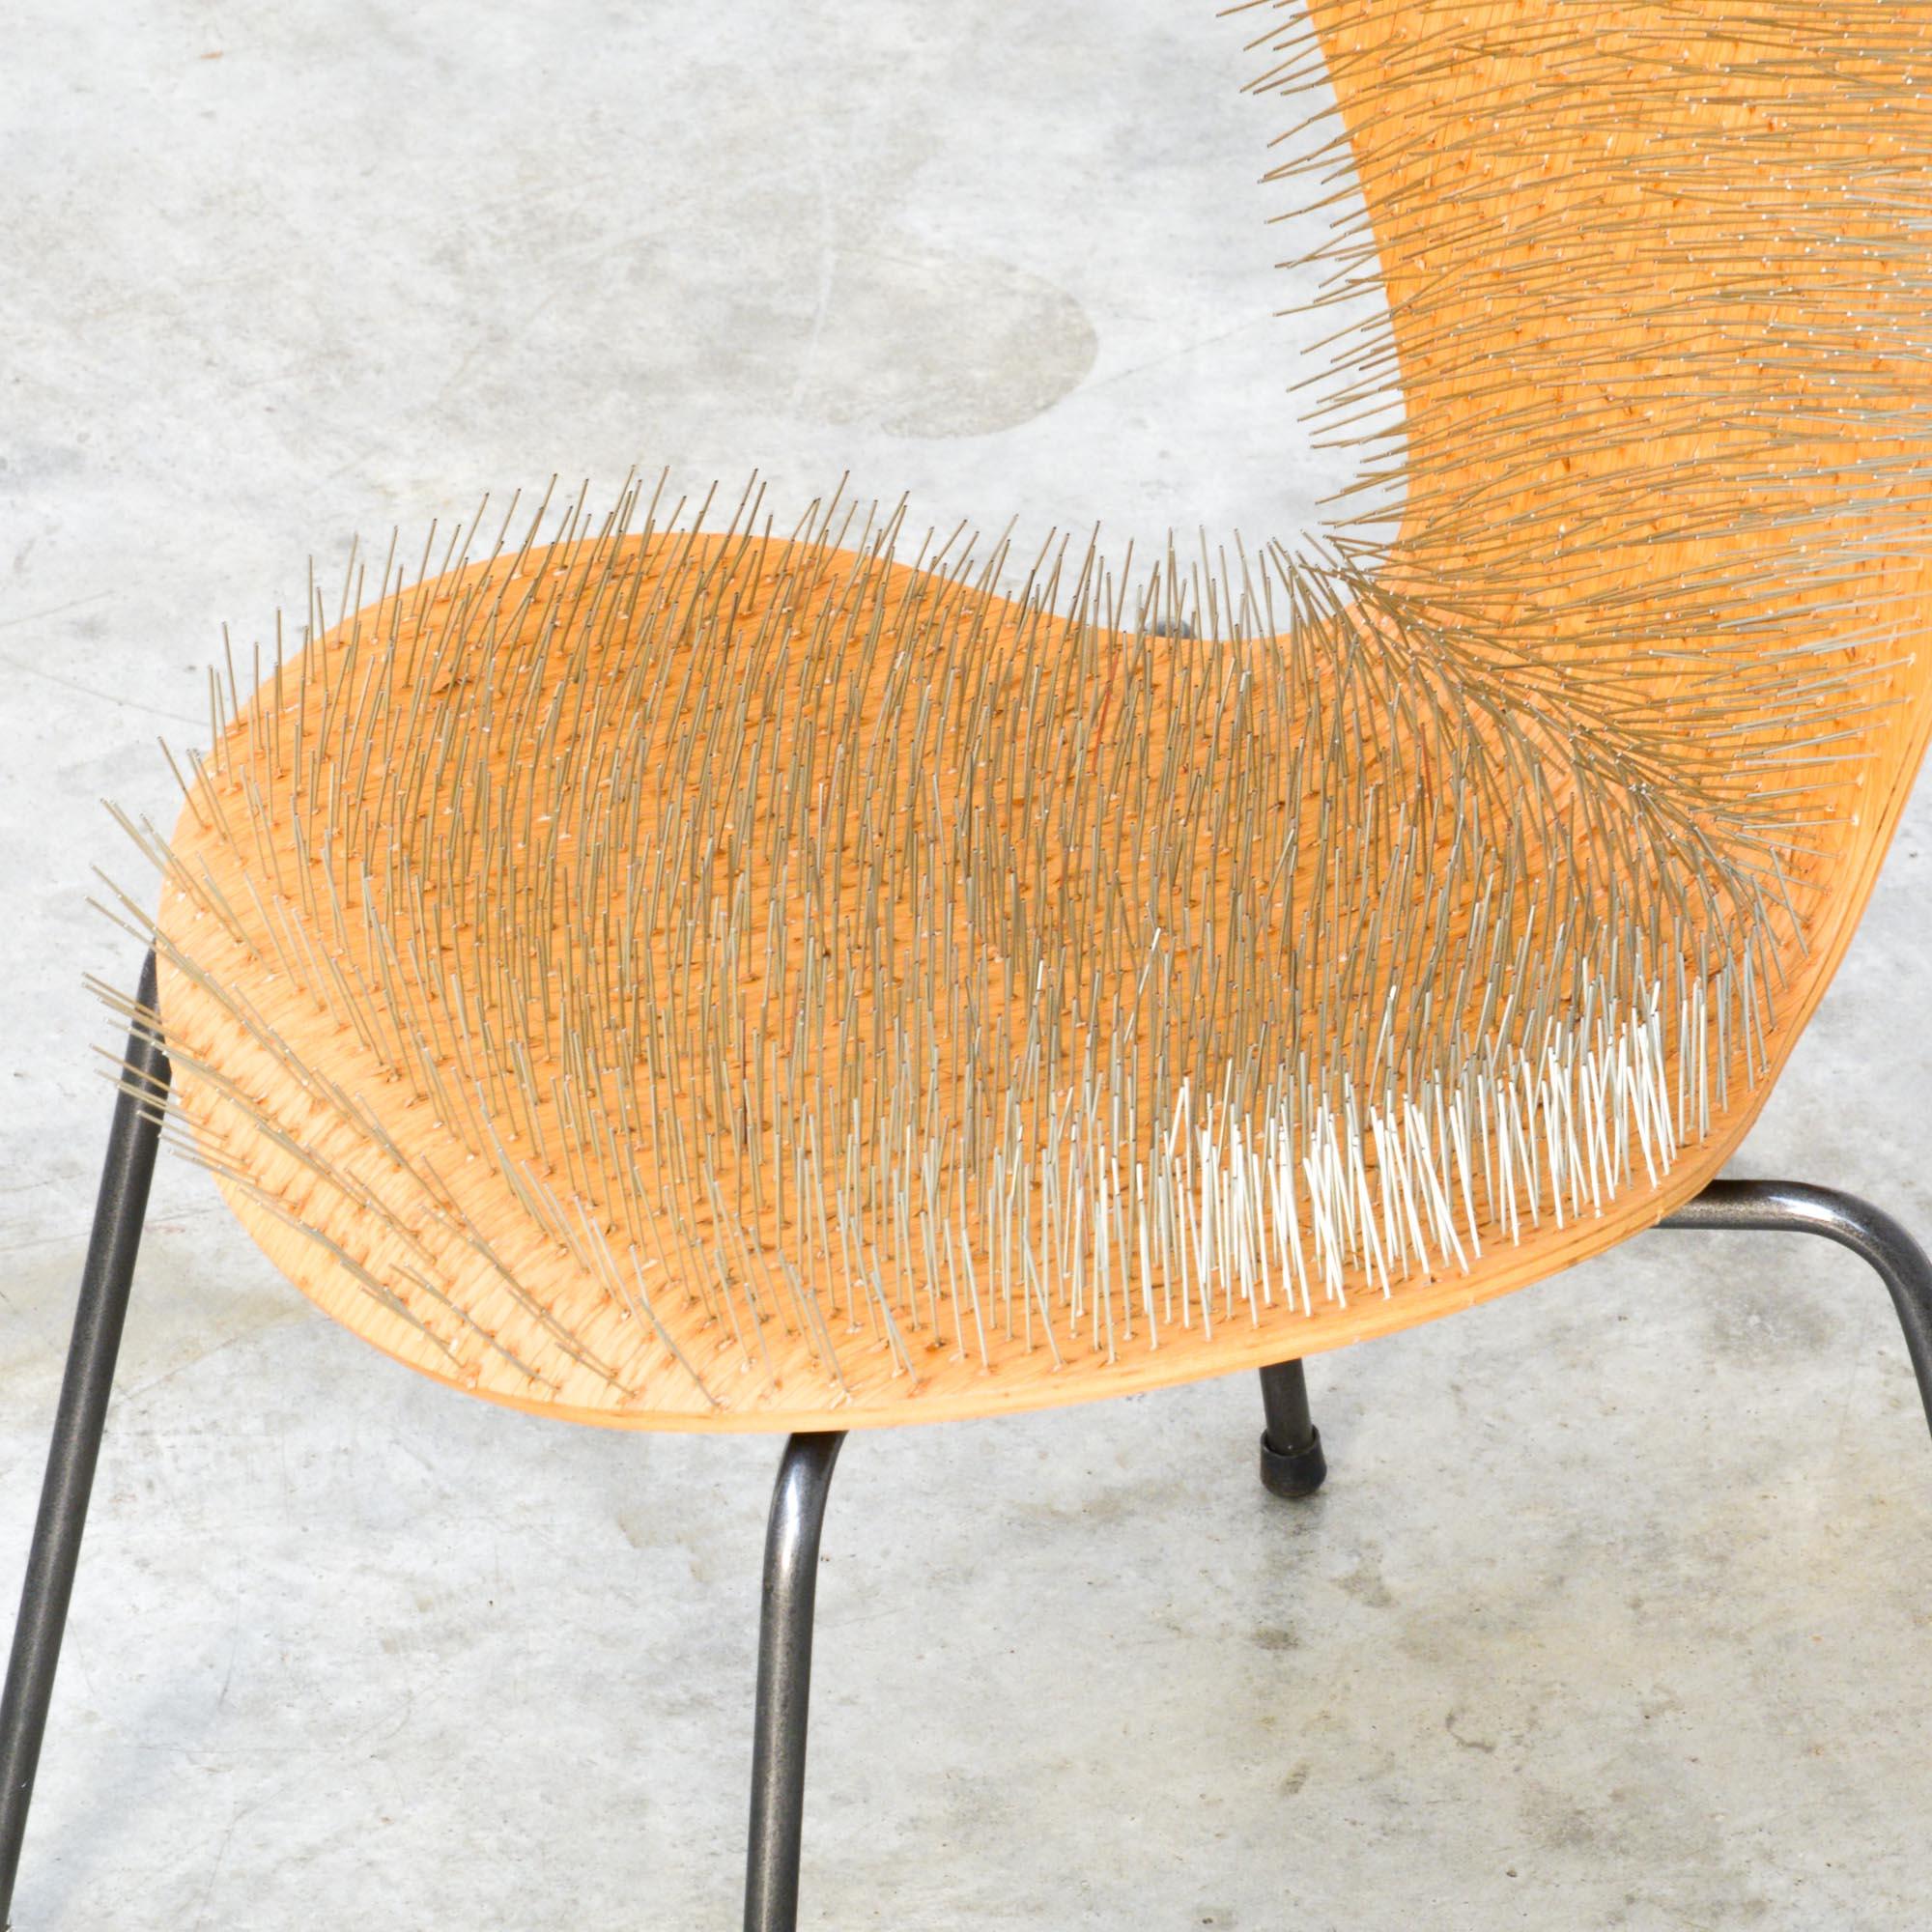 This butterfly chair has been molested in 2015 for the exhibition ‘Van vlinders en mieren’ (Of butterflies and ants) for the 60th anniversary of Arne Jacobsen’s Butterfly chair at the design museum of Gent. In a very Functionality kills the fun